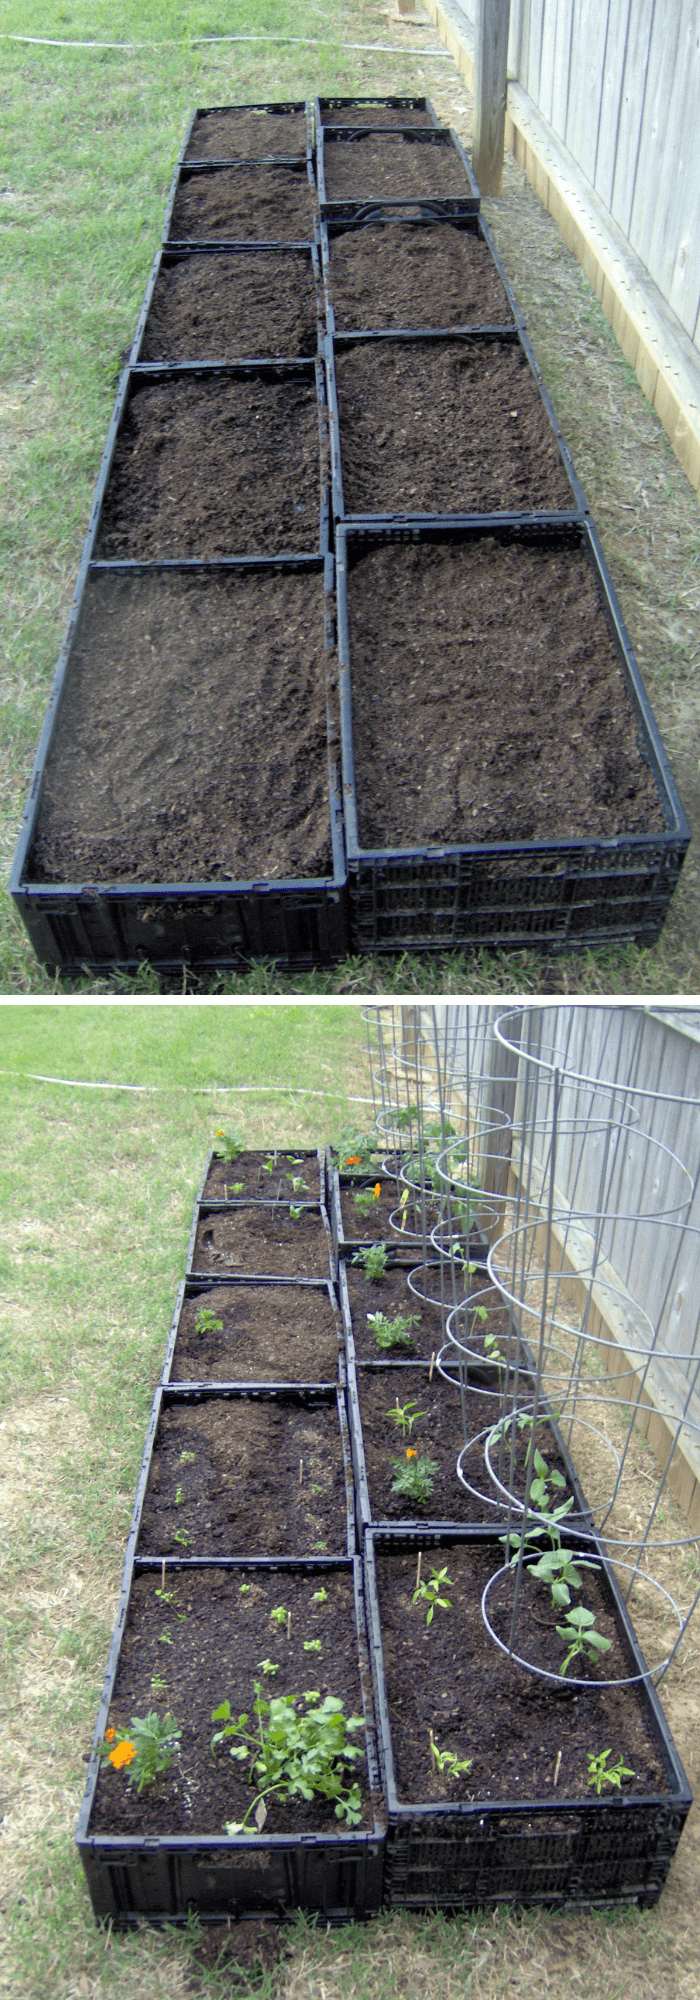 Square food garden with plastic crates